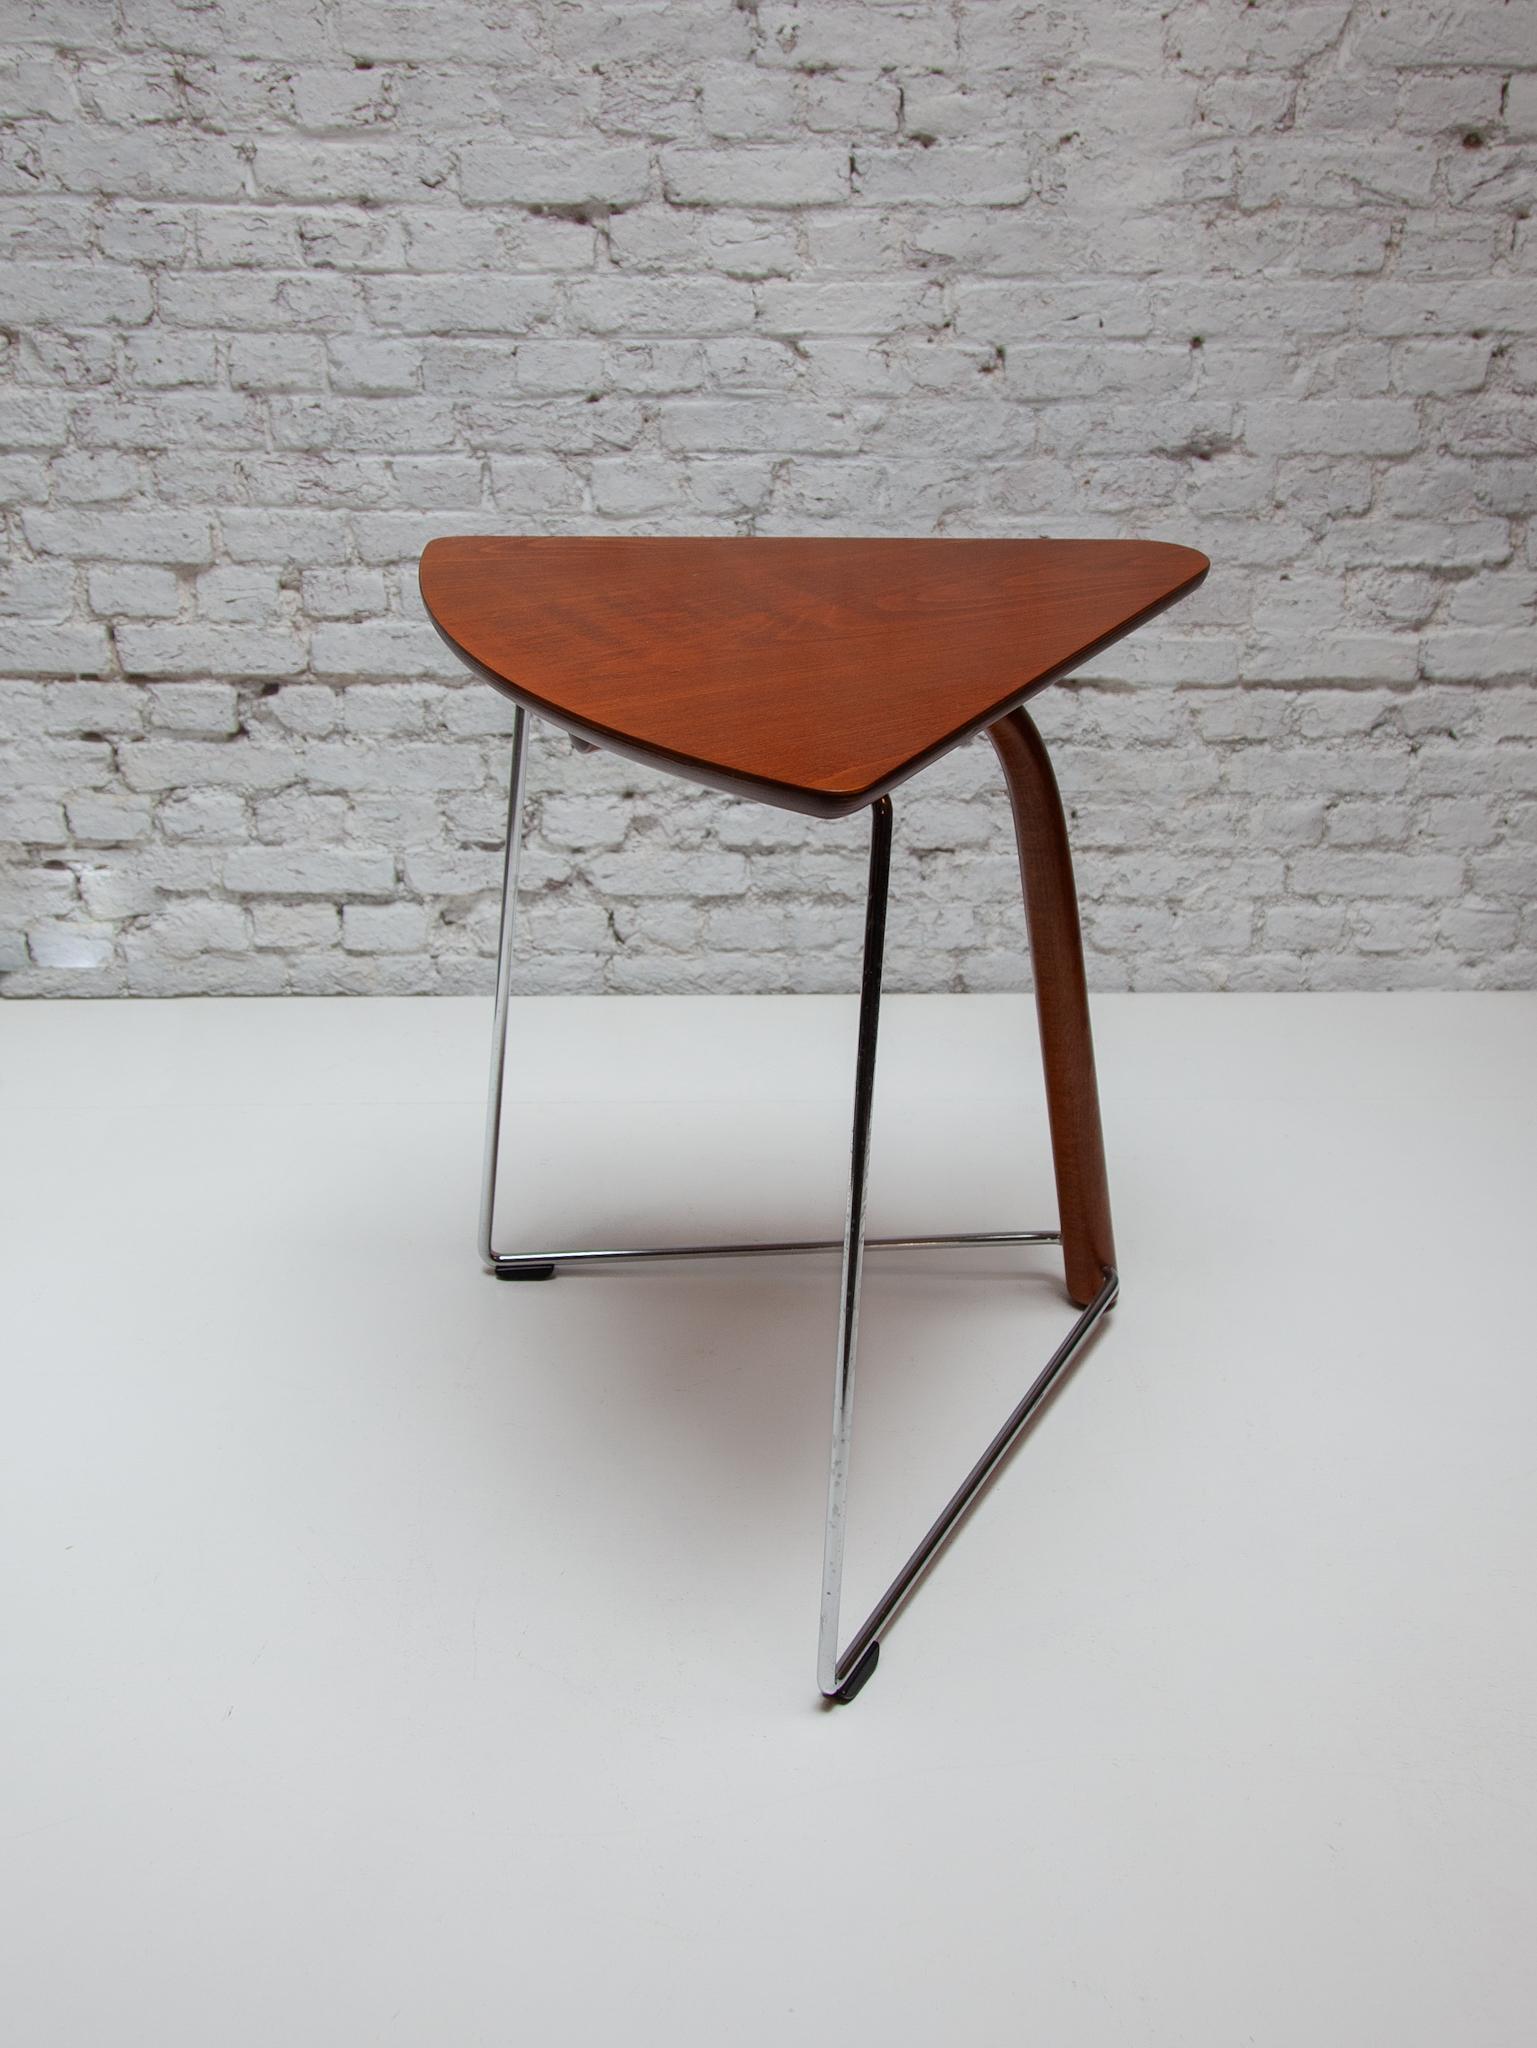 Hand-Crafted Set of Two Side Tables designed by Wulf Schneider and Ulrich Böhm, Thonet, 1980s For Sale